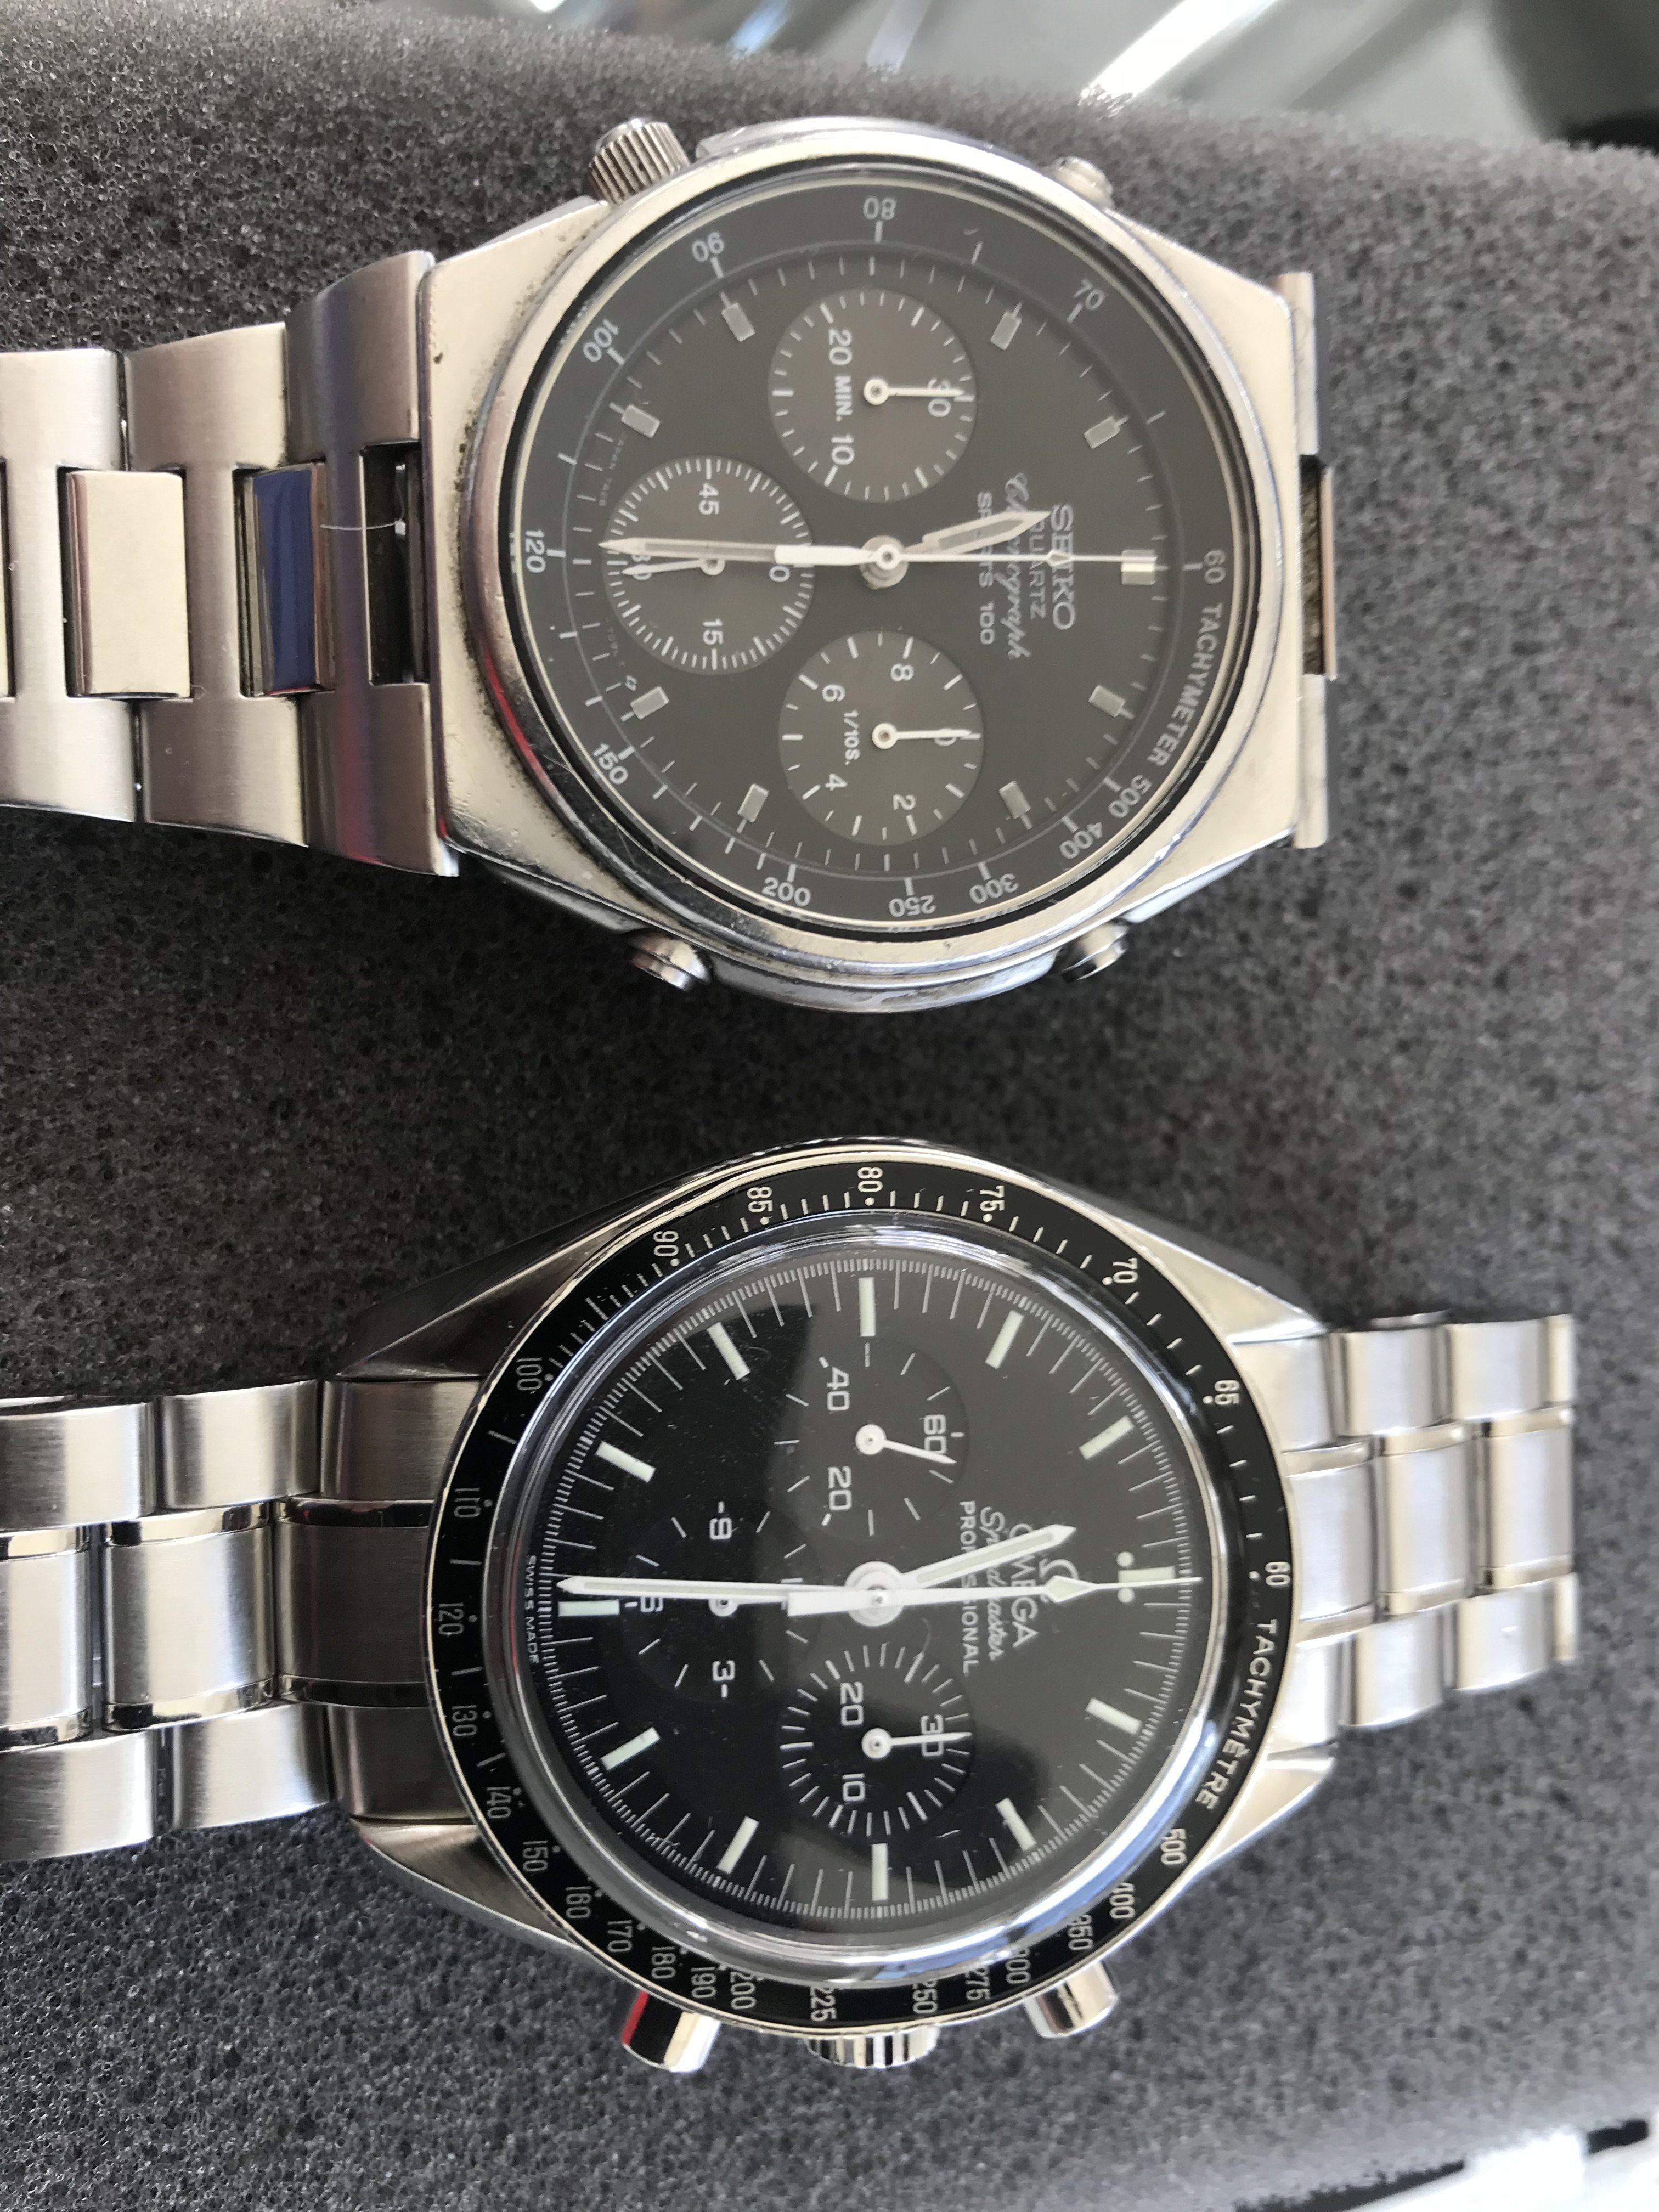 Finally a Speedmaster after all these years. | Omega Forums